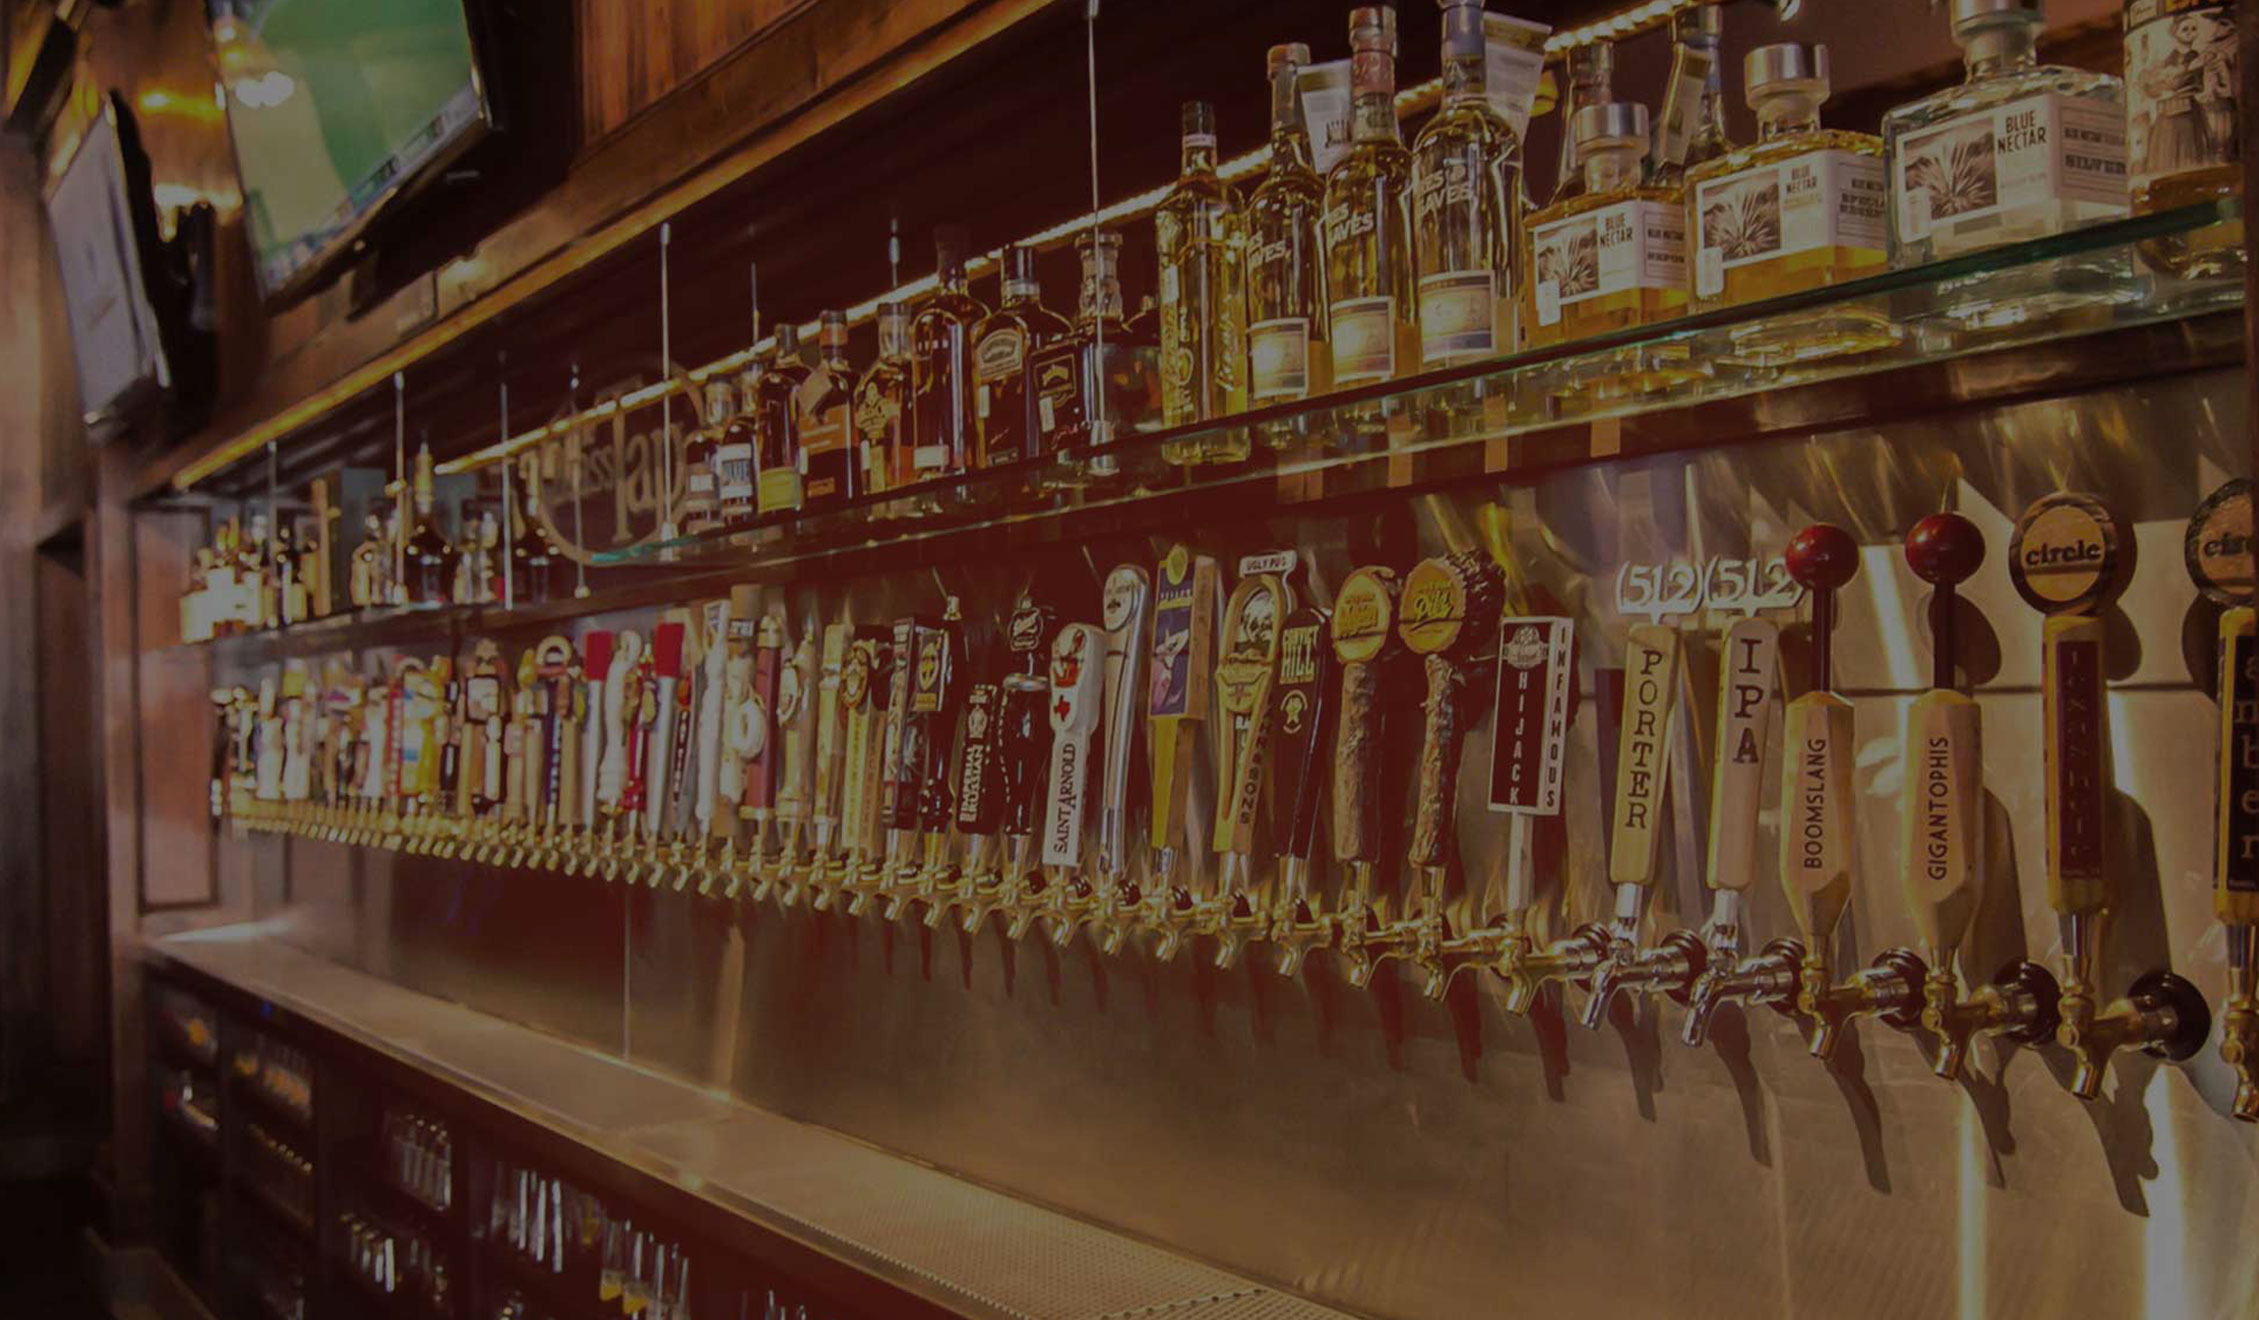 Hundreds of taps, including specialty and local beers